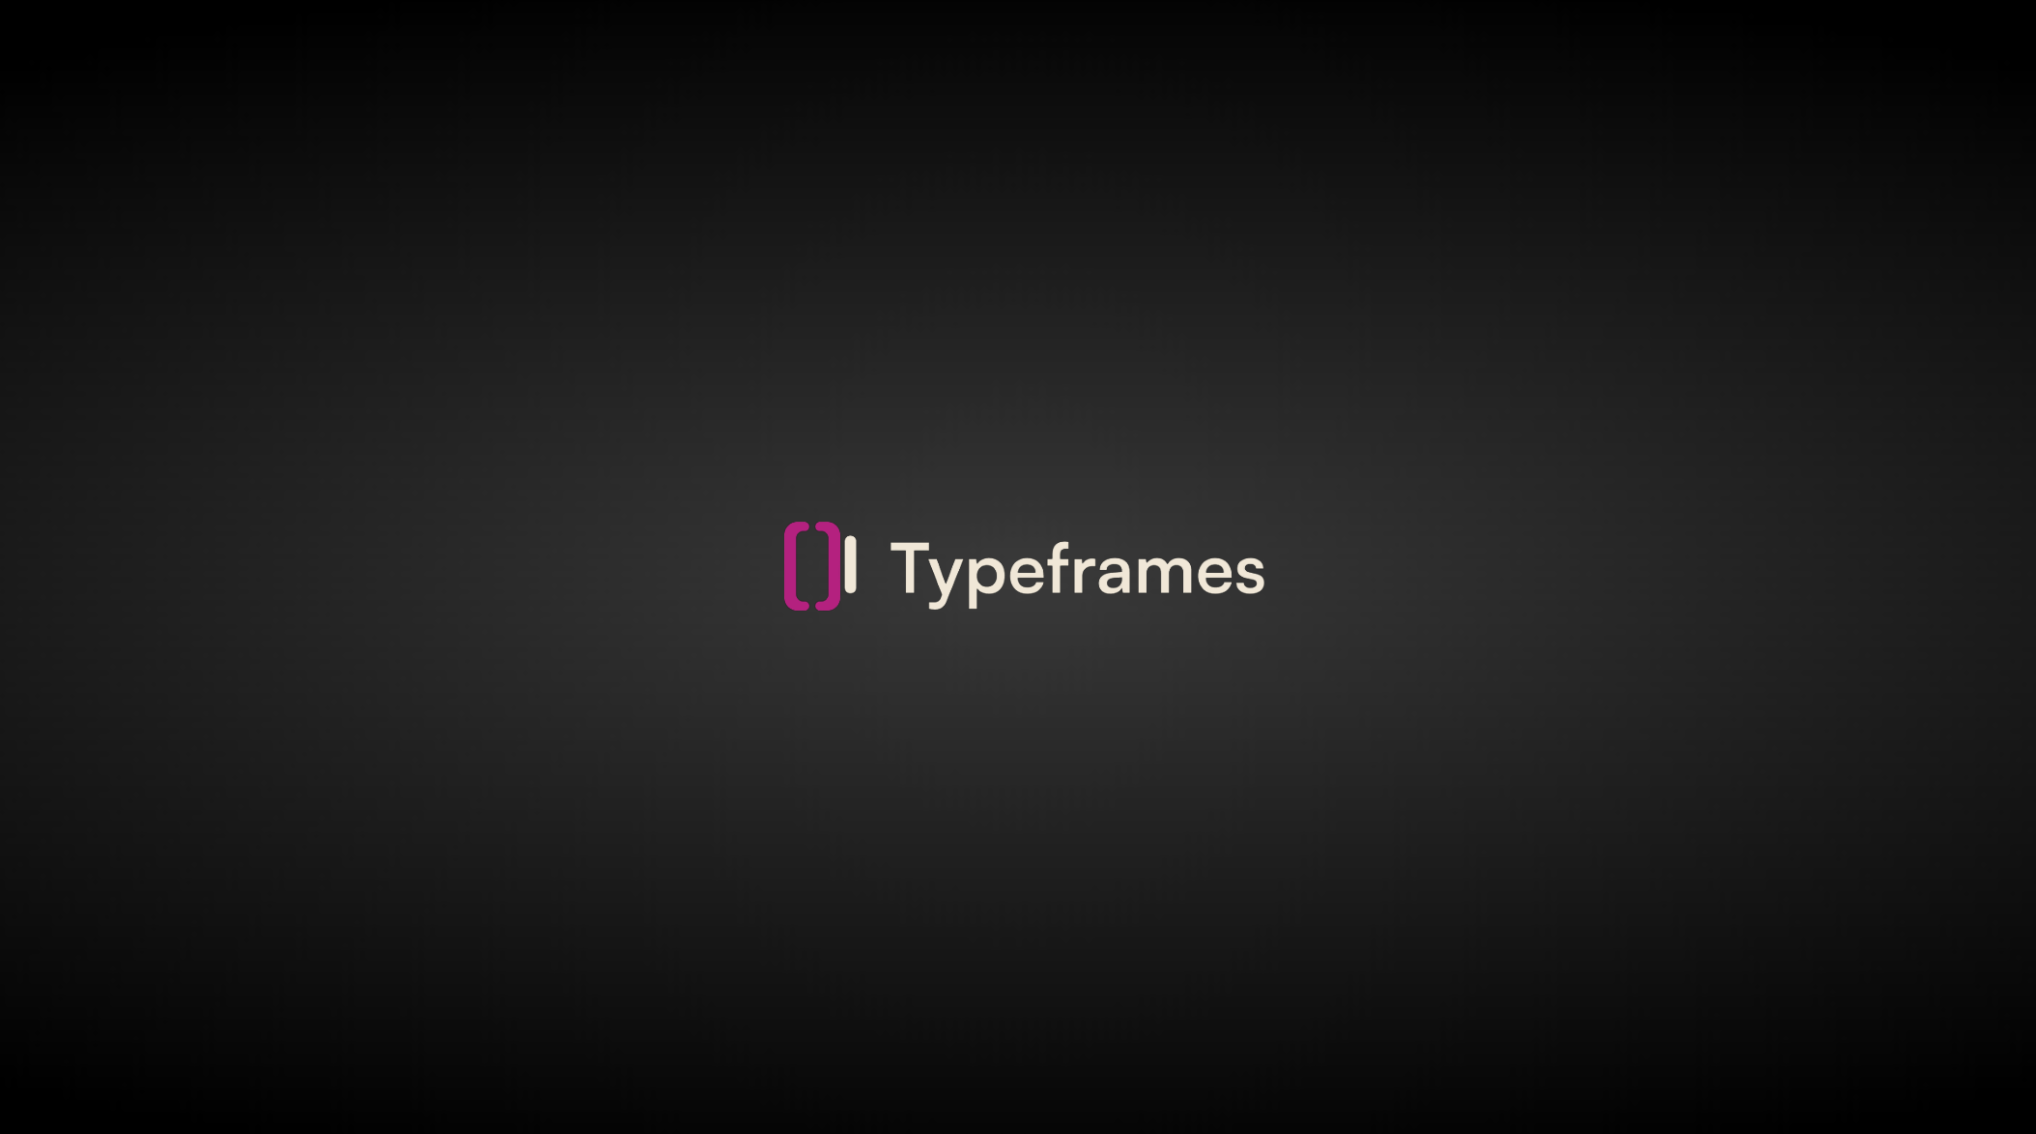 Typeframes: Product videos made easy